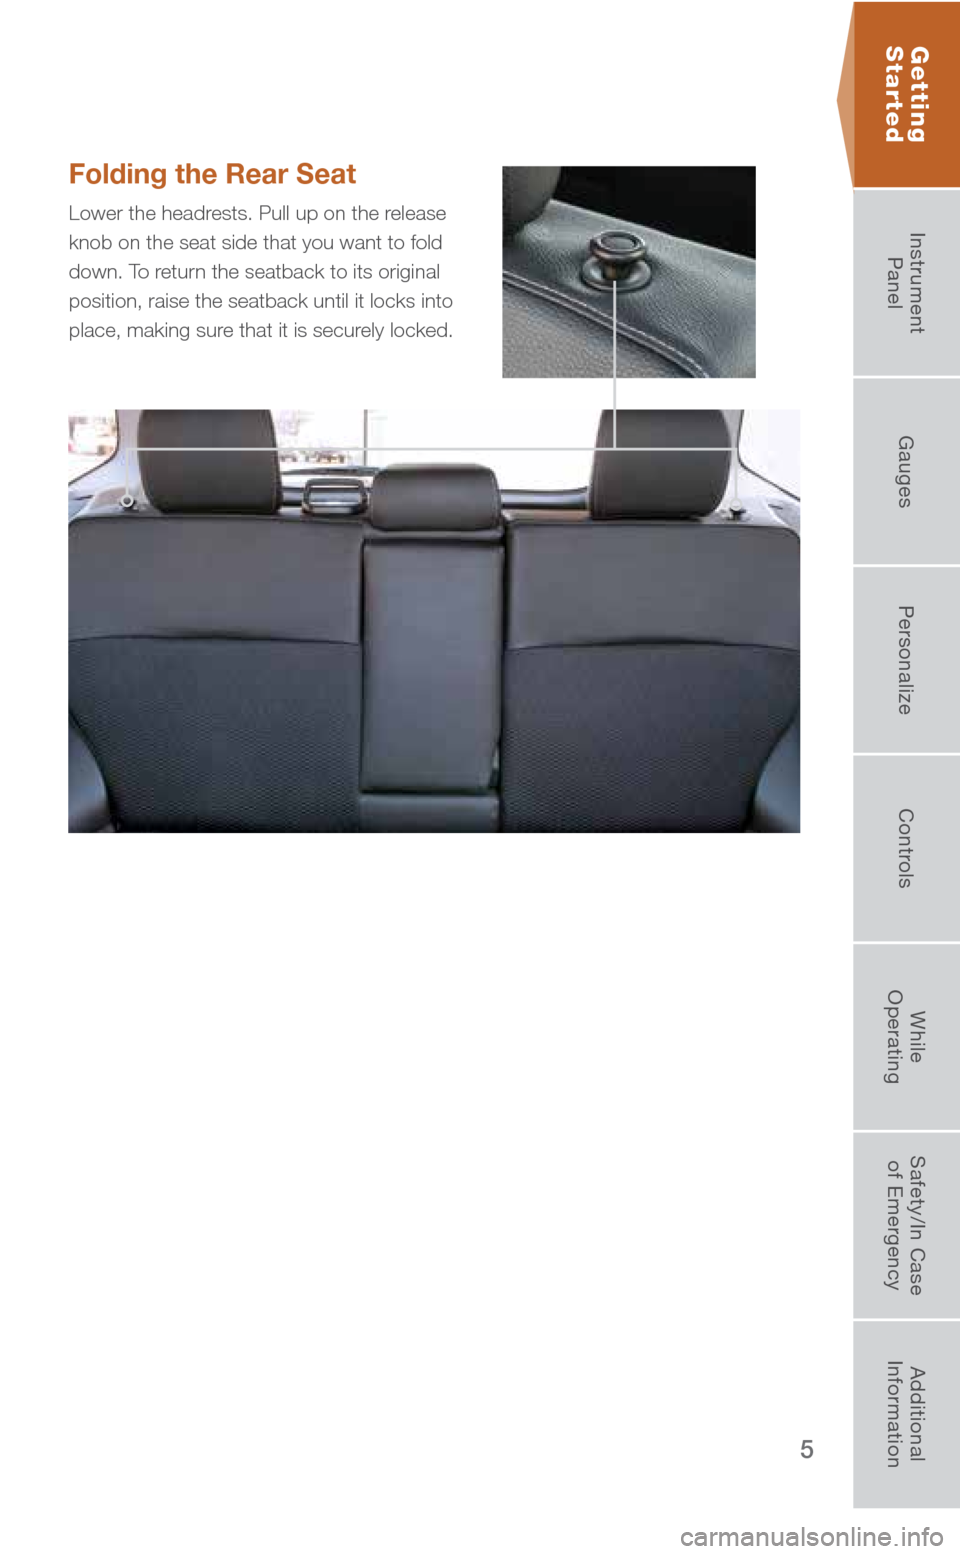 SUBARU FORESTER 2016 SJ / 4.G Quick Reference Guide 5
Folding the Rear Seat 
Lower the headrests. Pull up on the release 
knob on the seat side that you want to fold 
down. To return the seatback to its original 
position, raise the seatback until it l